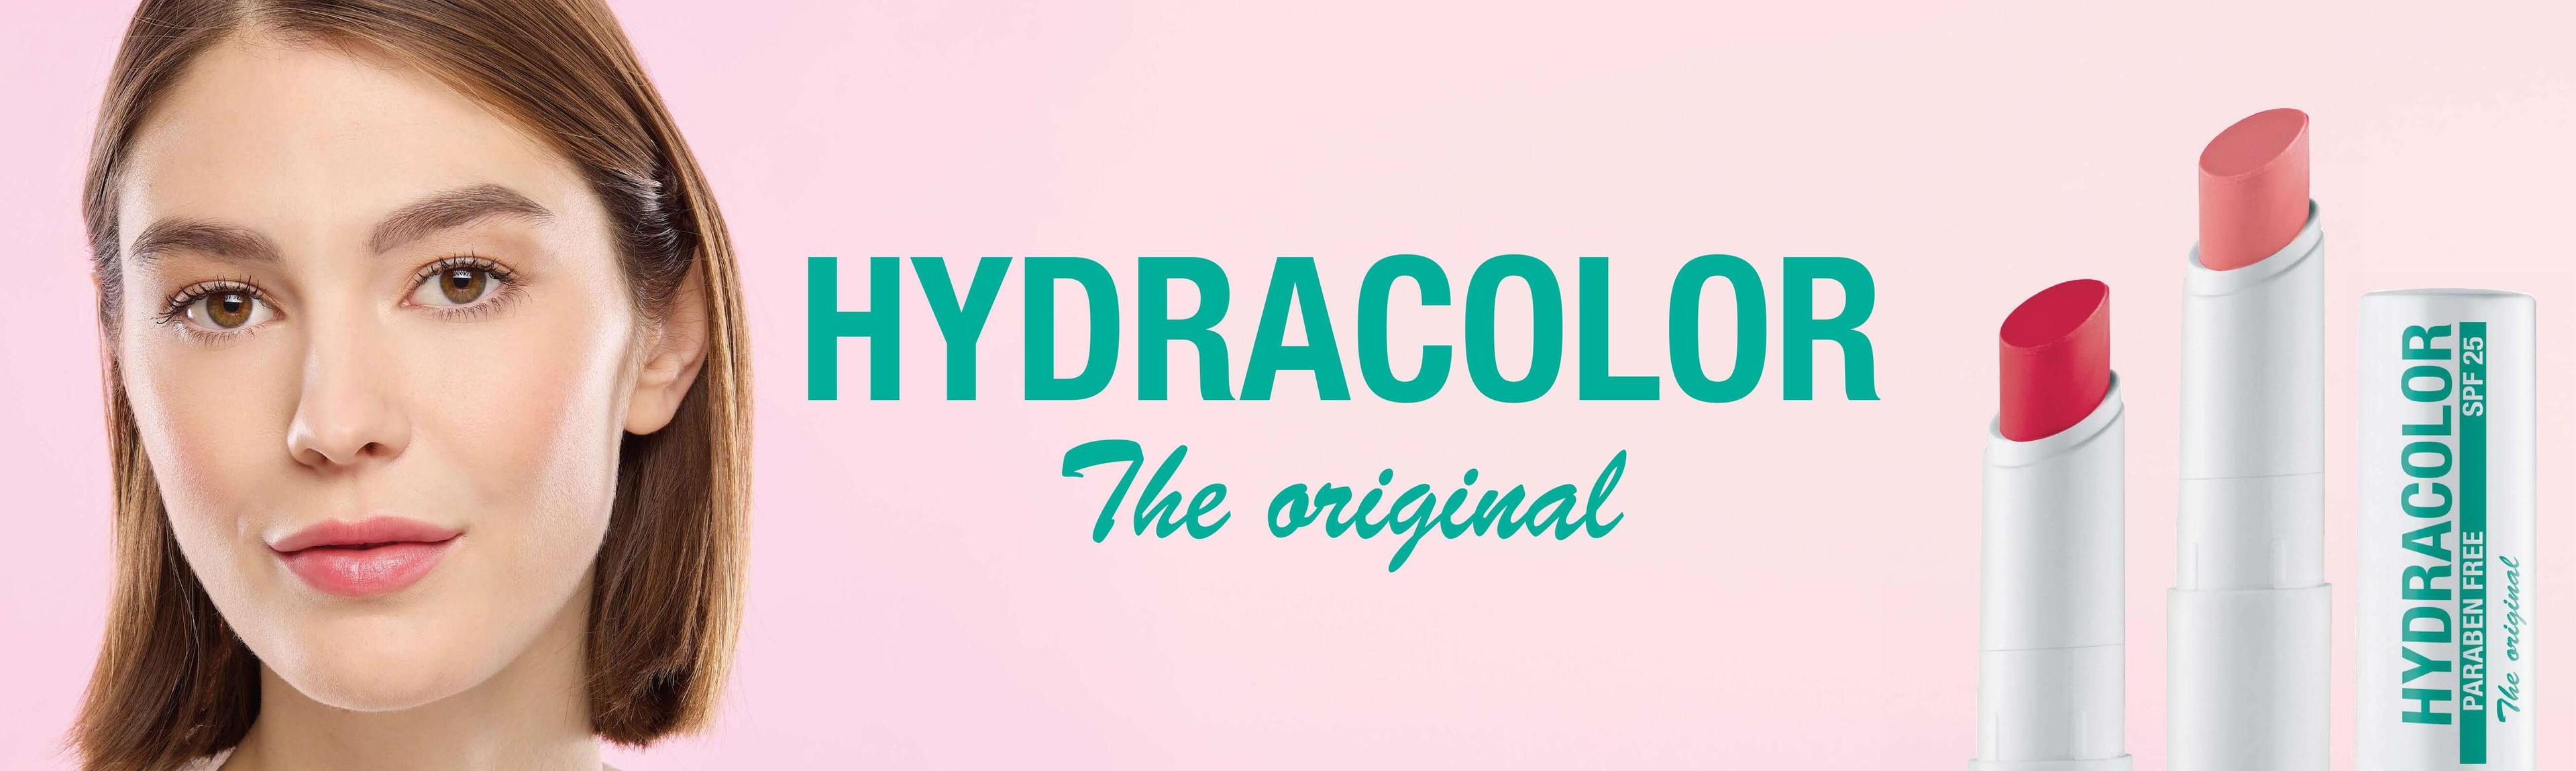 Brand banner from HYDRACOLOR